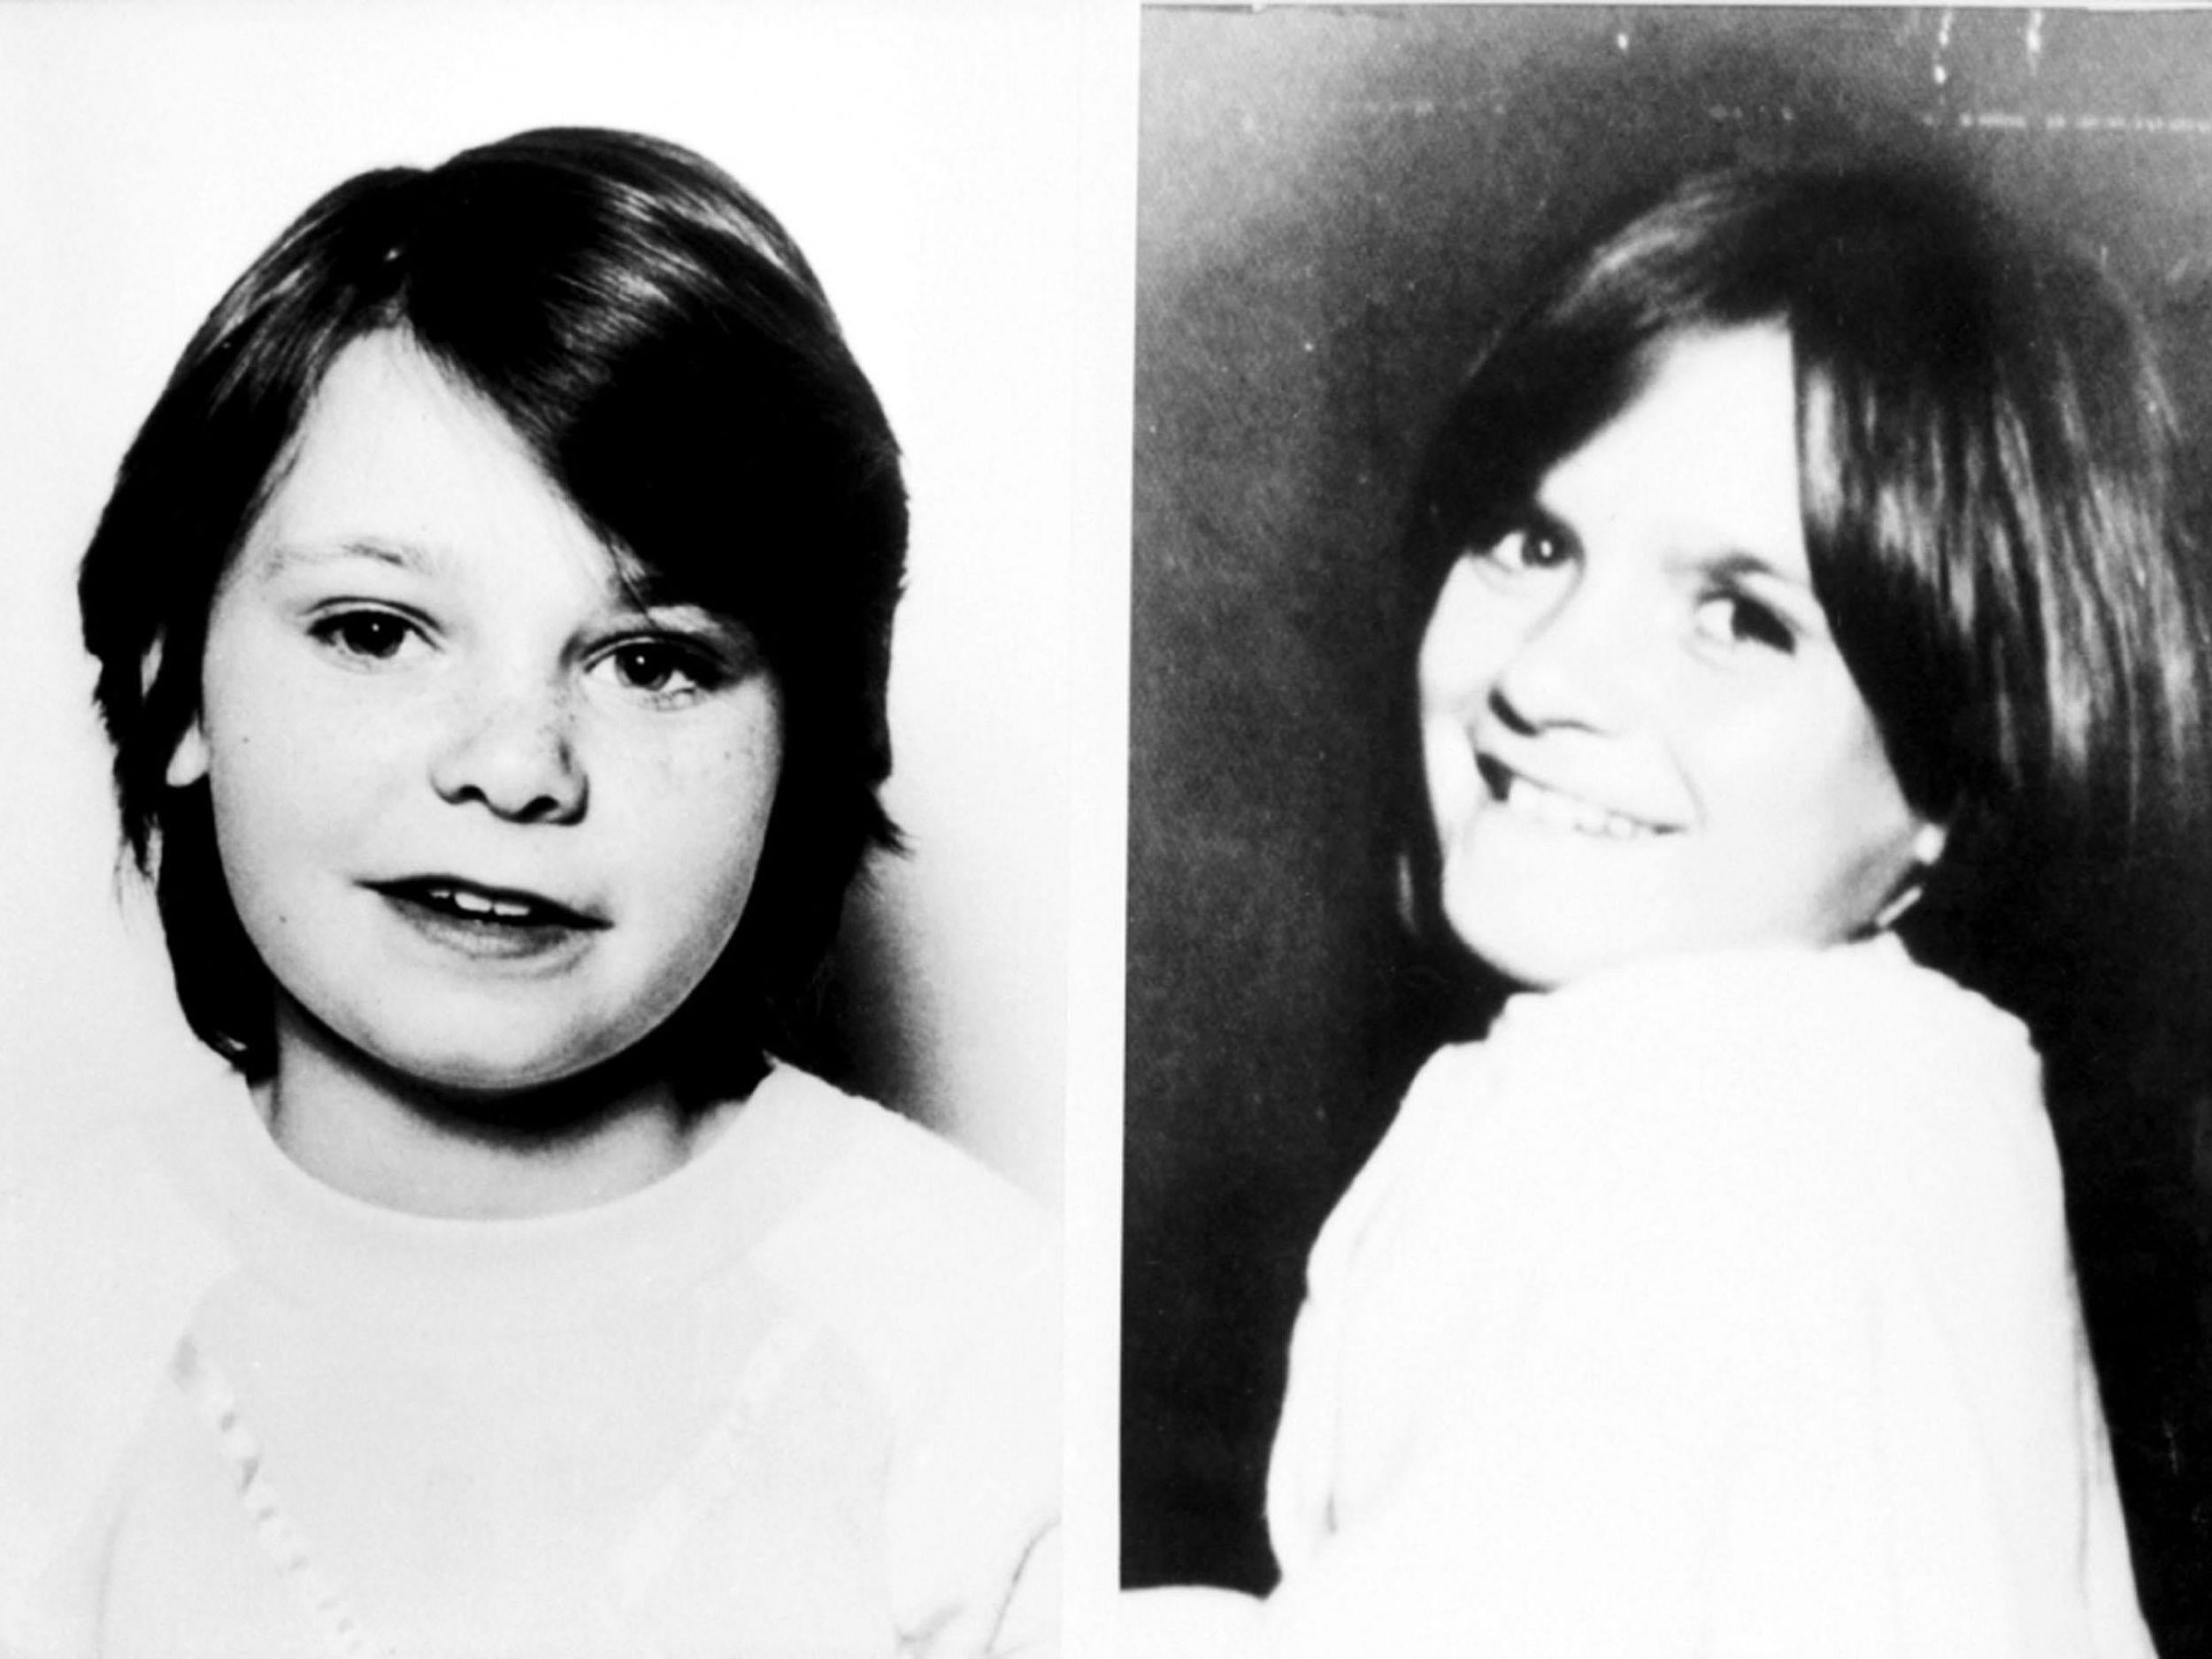 Karen Hadaway (left) and Nicola Fellows went out to play after school and were found dead in a Brighton park in October 1986